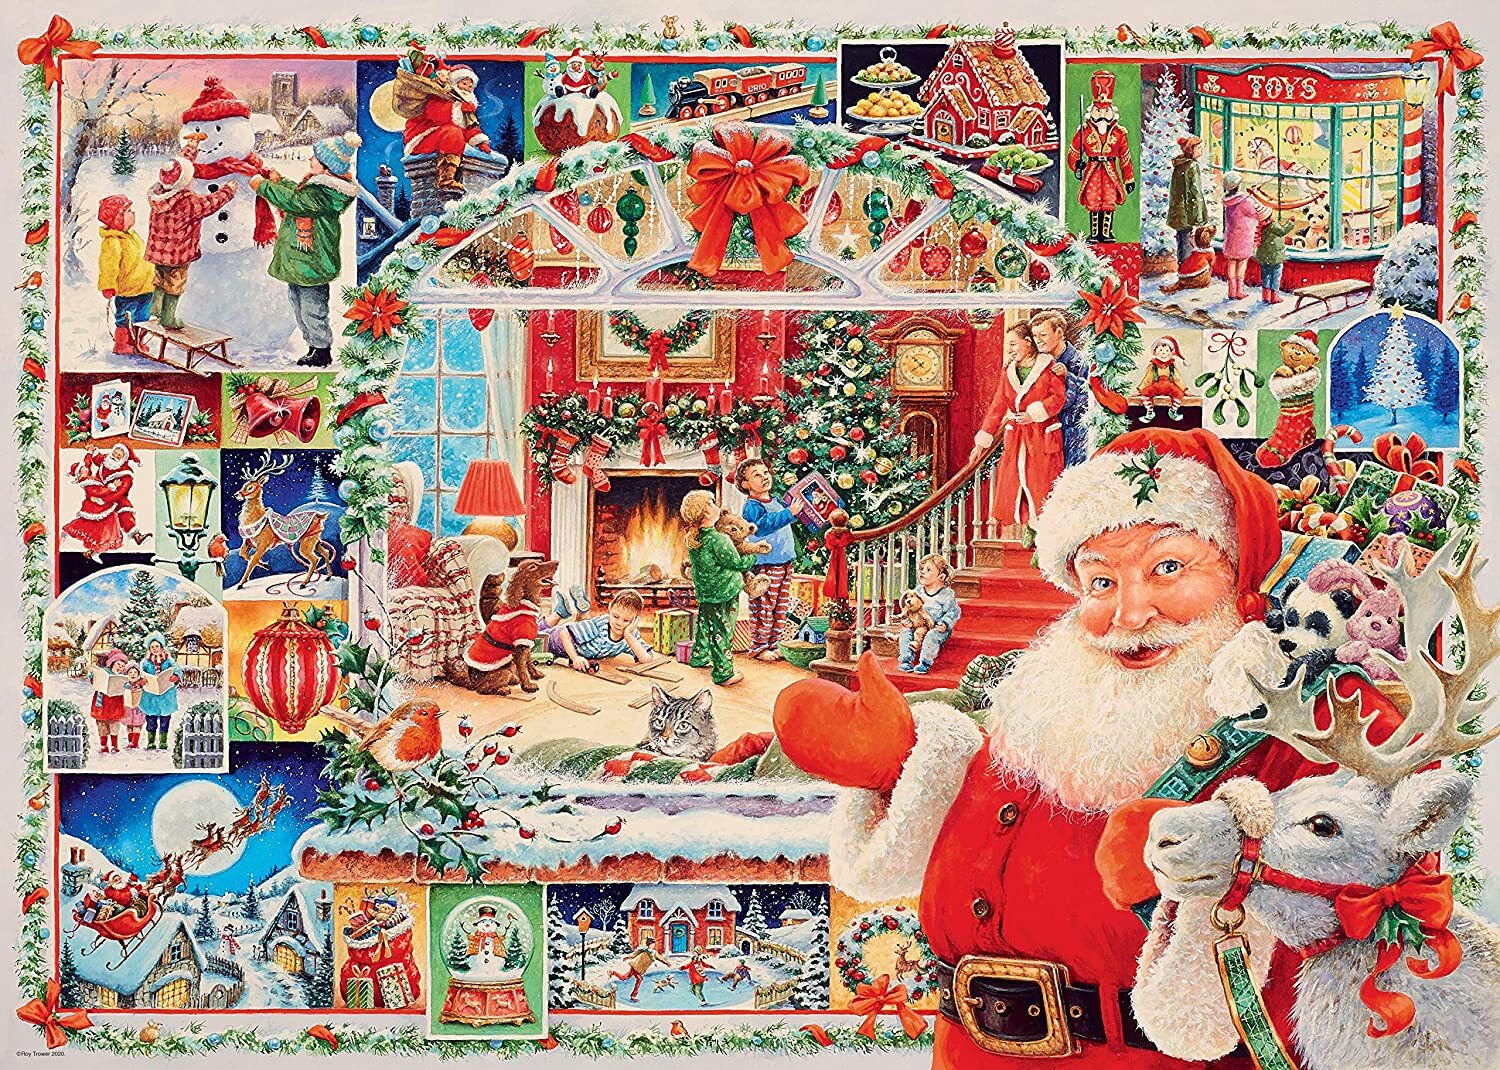 Ravensburger - Christmas is Coming 1000 Piece Jigsaw Puzzle